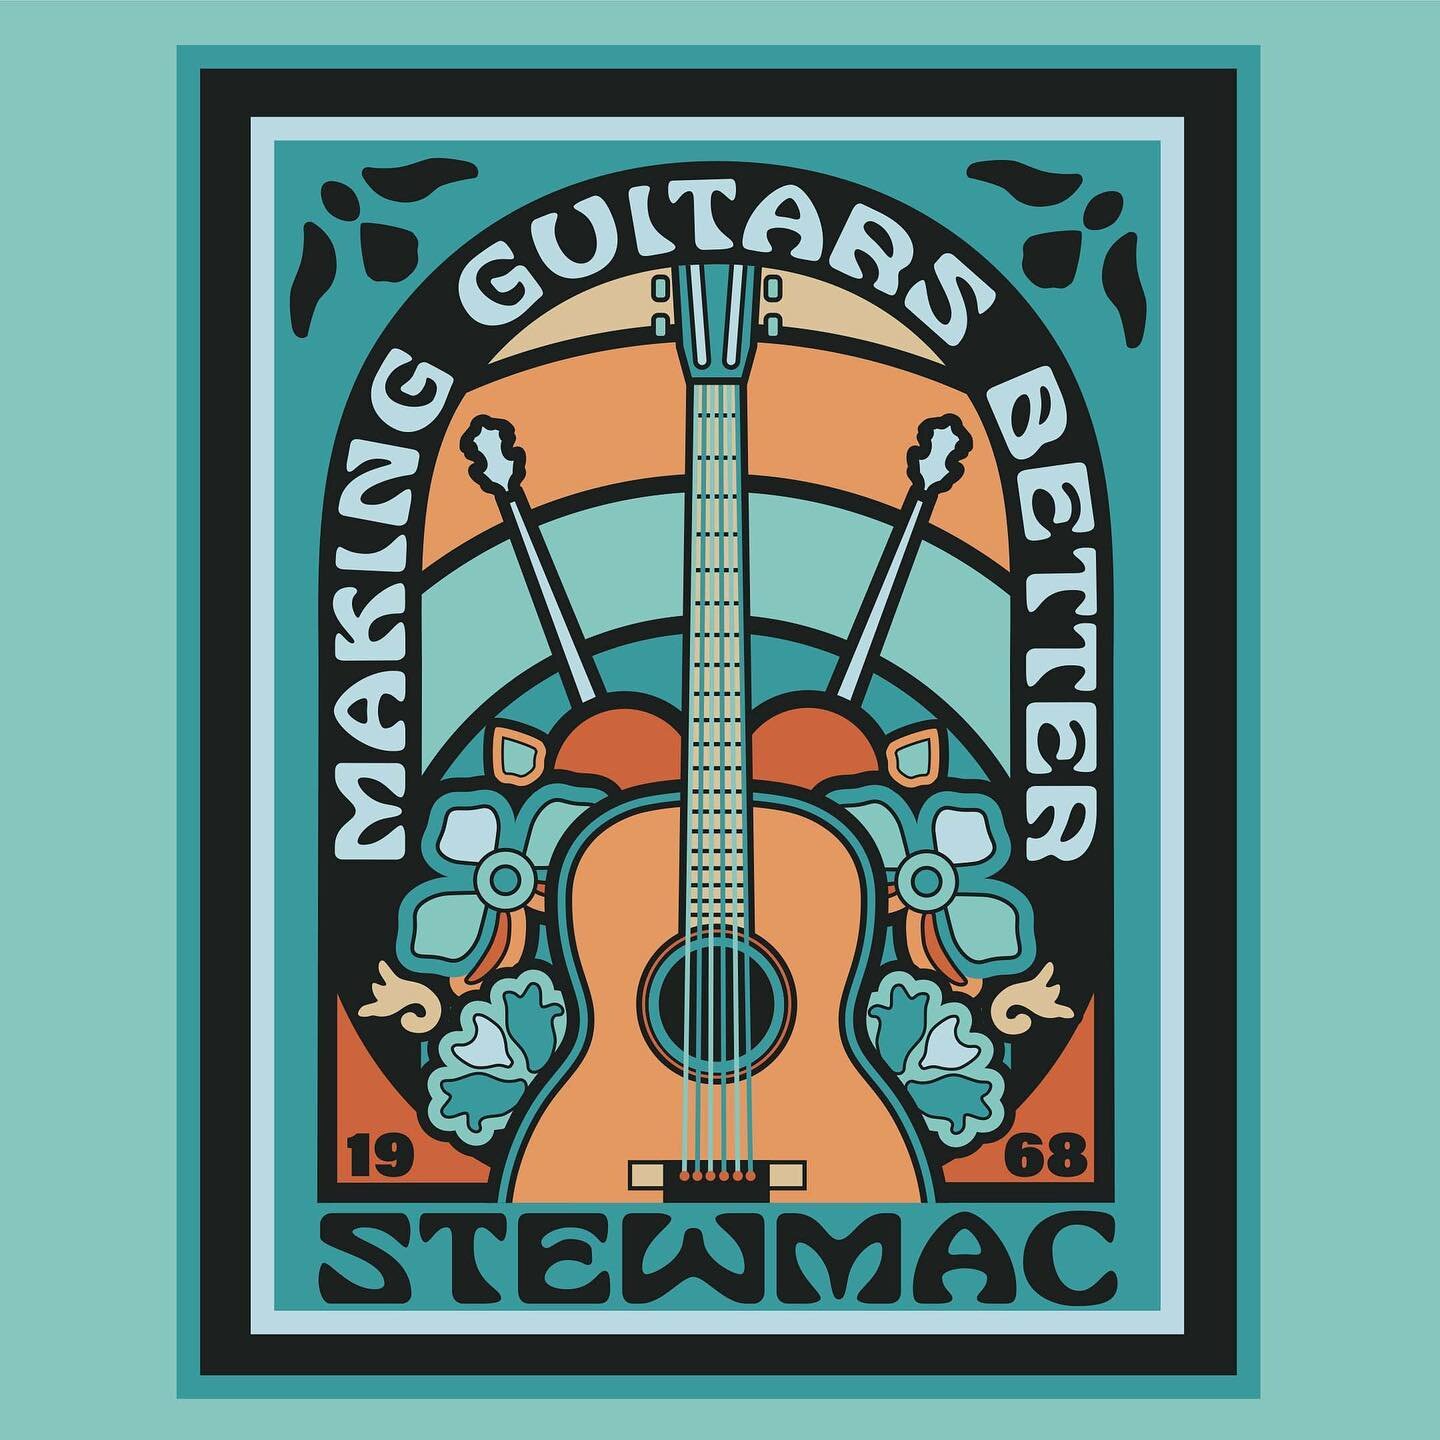 Excited to finally share the 2nd poster I created for a series of merch by @stewmac_guitar 
Both poster designs are a nod to Stewmac&rsquo;s 1968 beginnings and now available as various merch items on their site! 🎸
.
.
Thanks again to the fabulous @